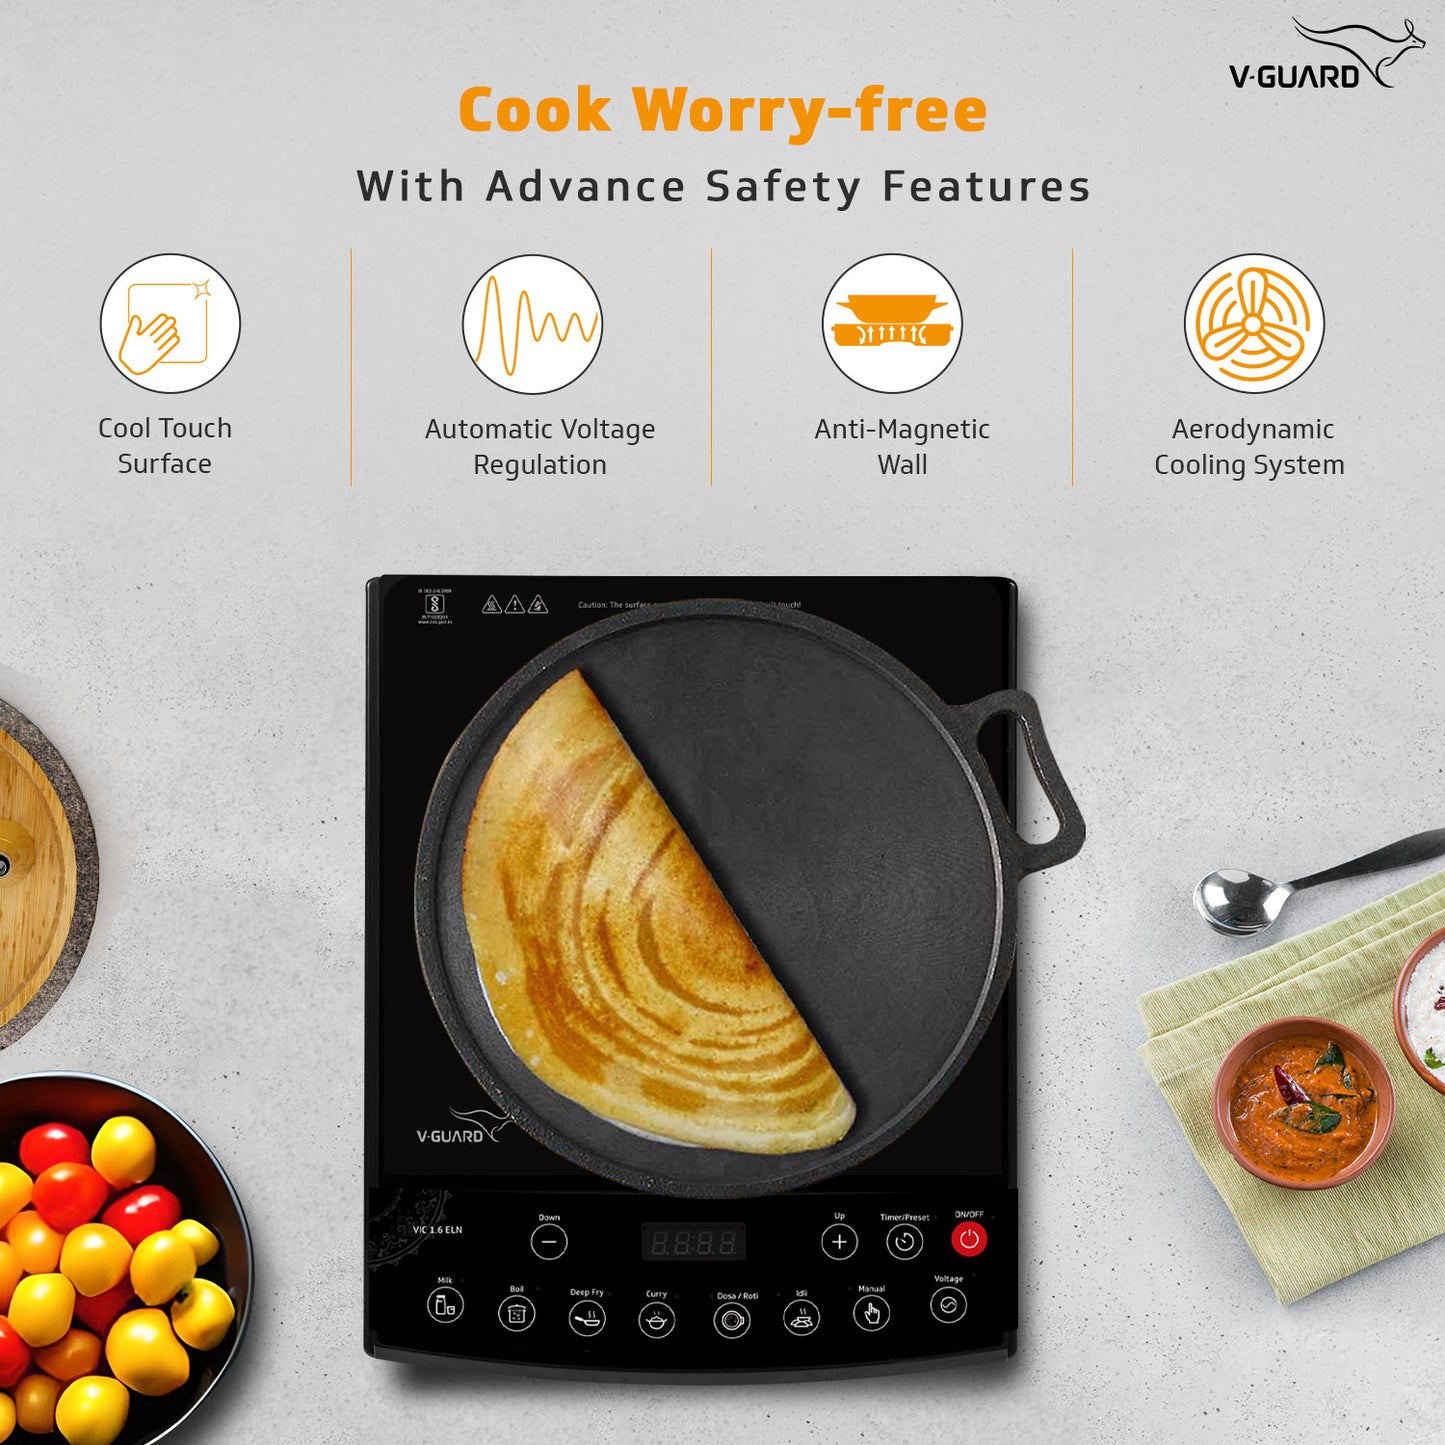 VIC 1.6 ELN 1600 Watt Induction cooktop, 7 Cooking Modes, 4 Hour Timer Function, 24 Hour Preset Function